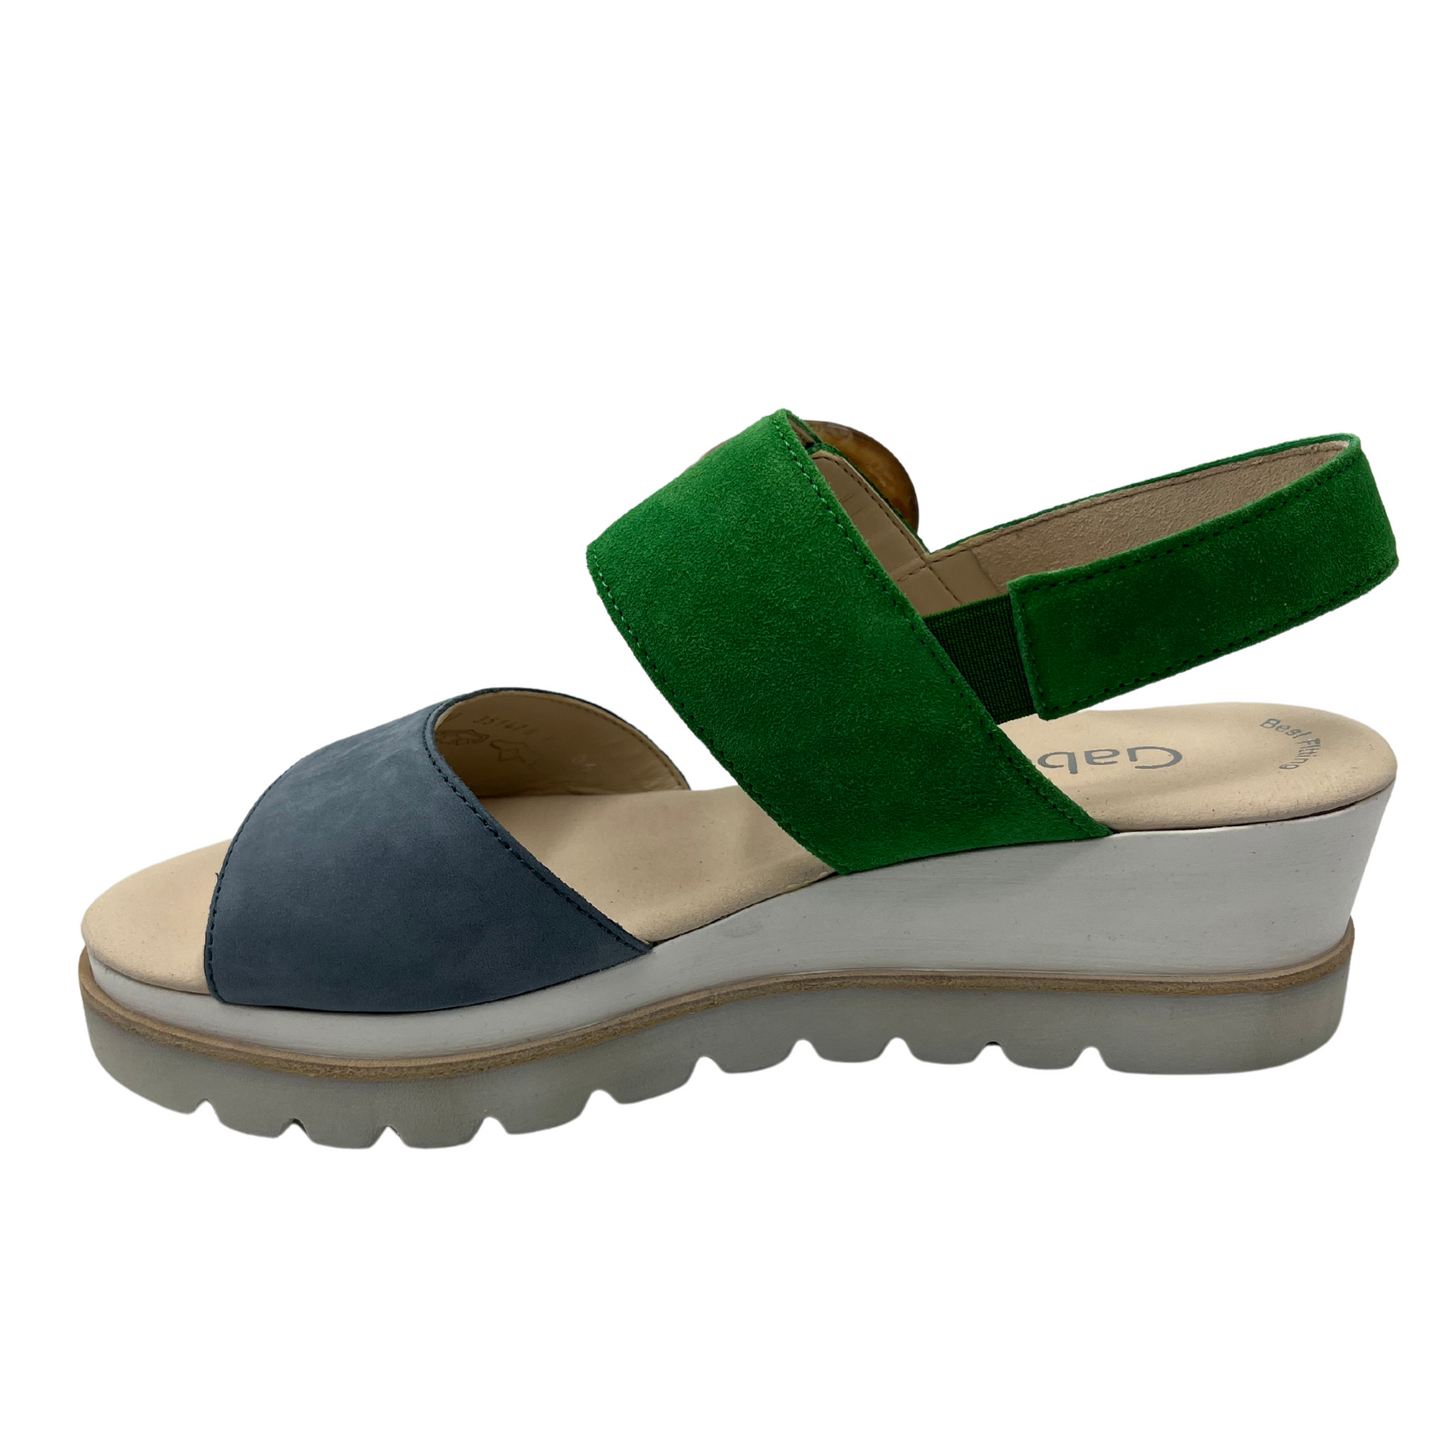 Left facing view of green and blue wedge sandal with sling back strap and open toe